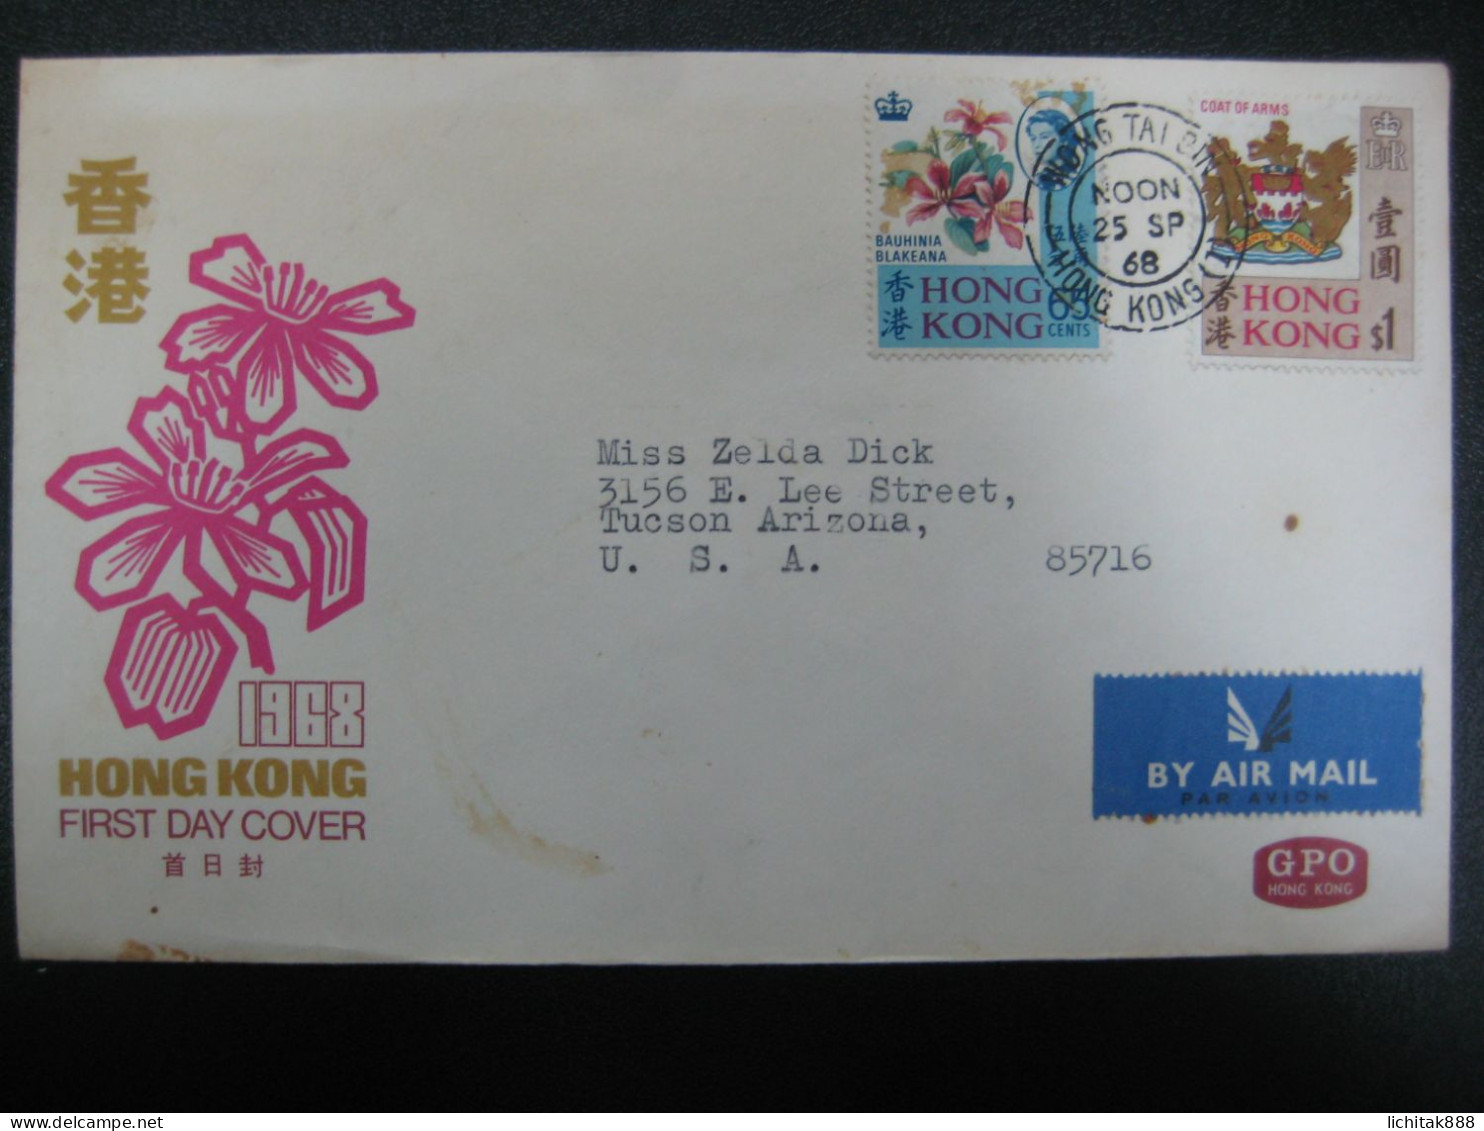 1968 Hong Kong  Bauhinia Blakeana Flower & Coast Of Arms GPO FDC First Day Cover - Covers & Documents